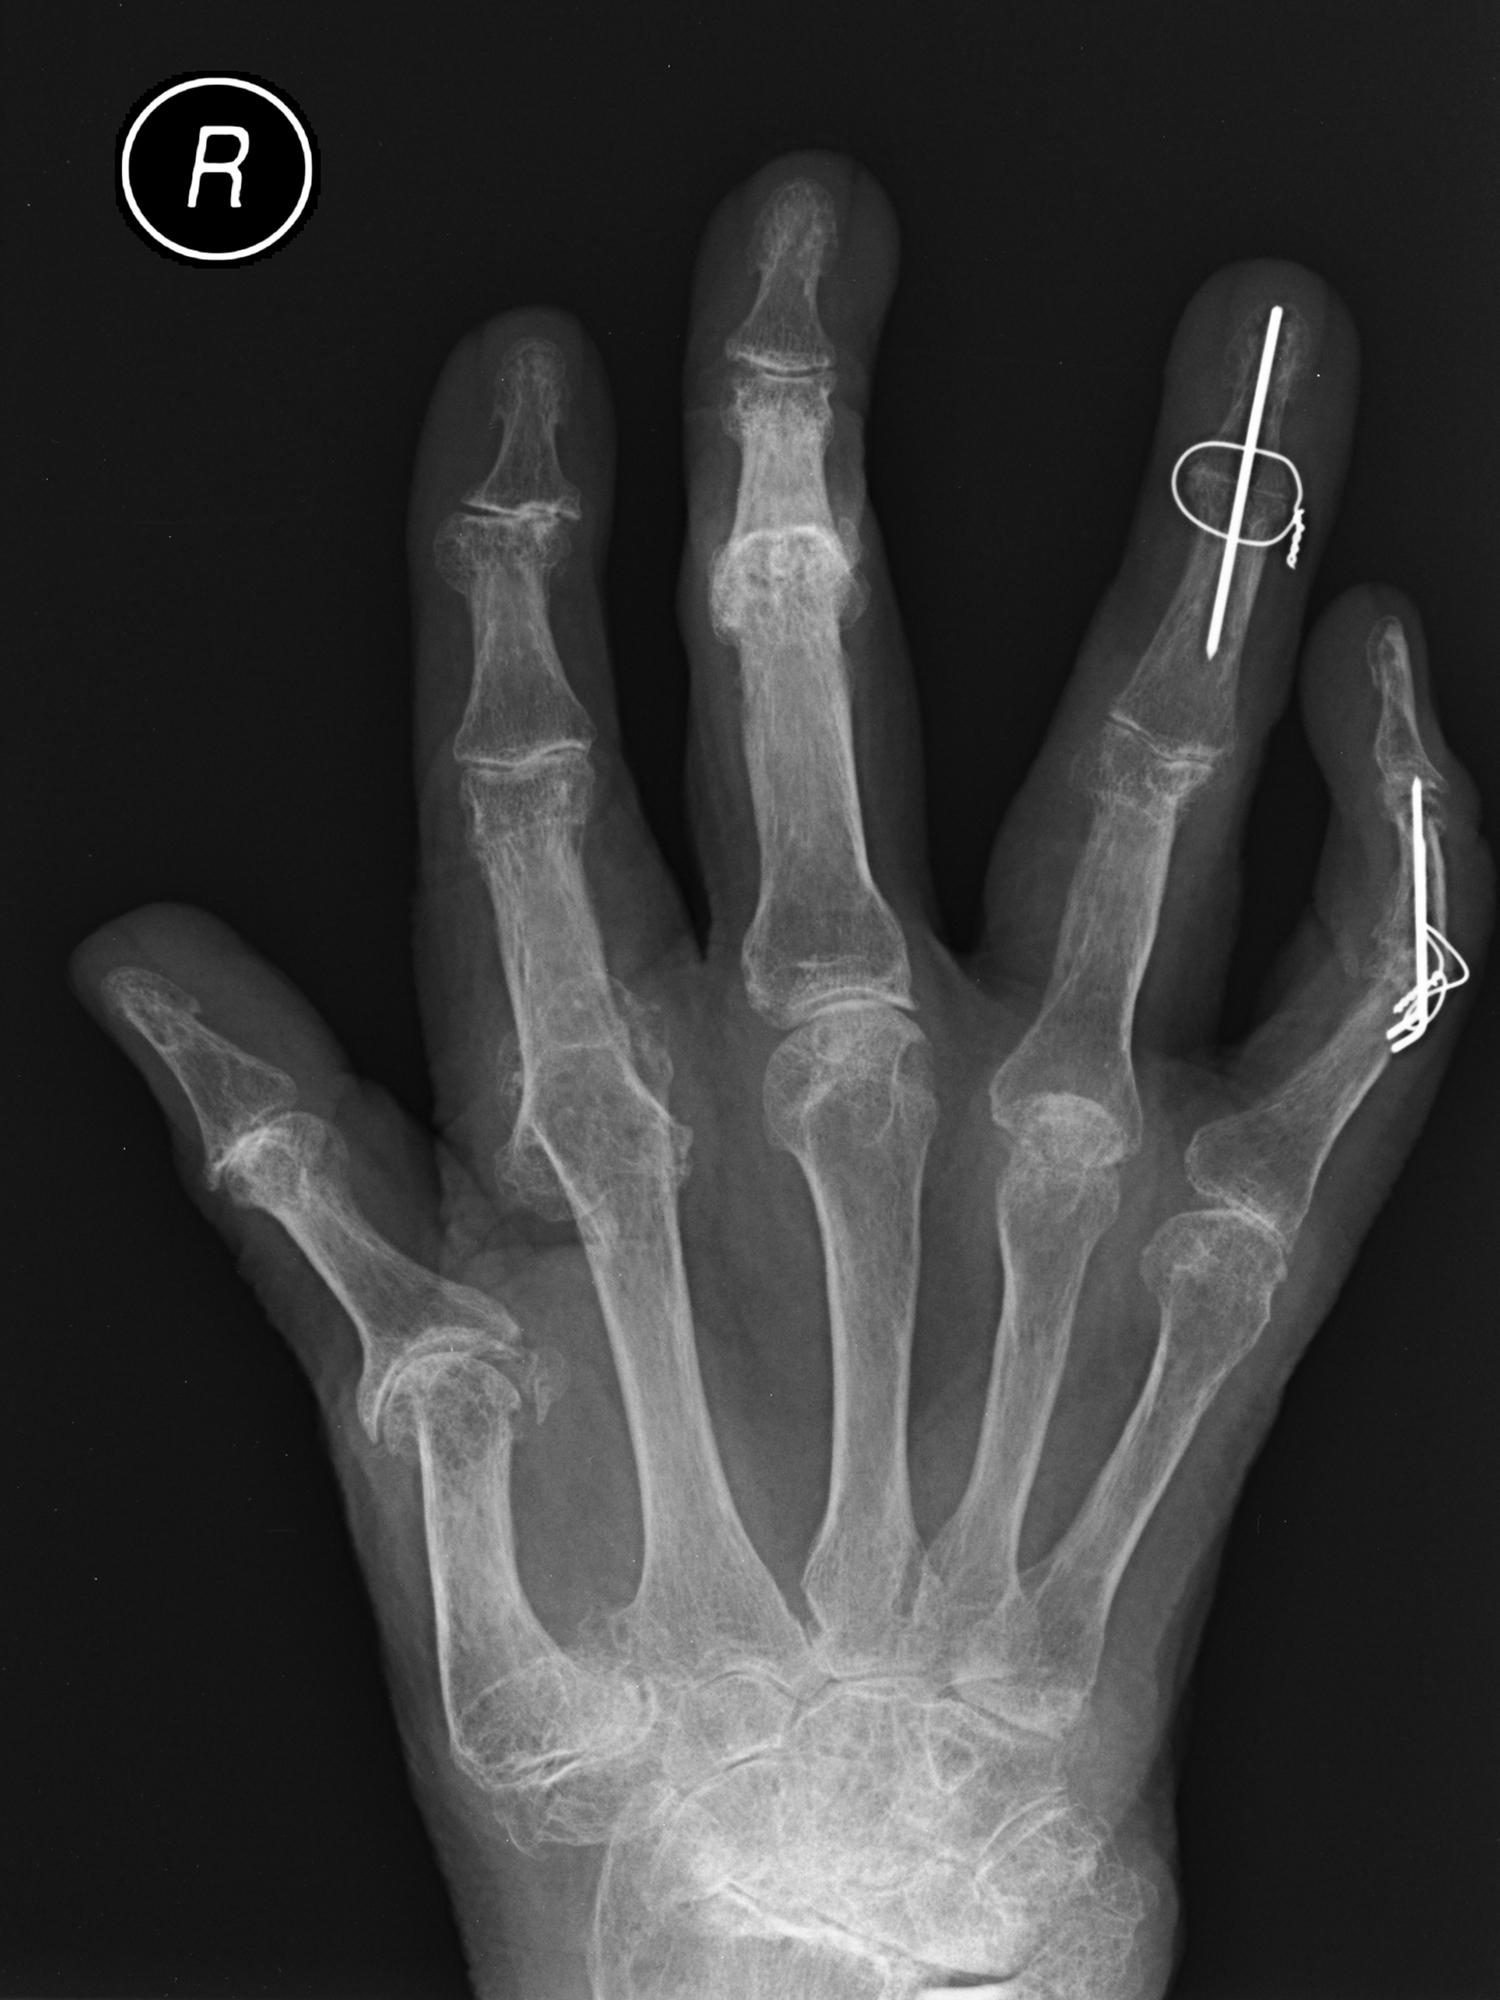 Fig. 59.1, Various rheumatoid deformities of the hand including a swan neck deformity of thumb, subluxation of the index metacarpophalangeal joint (MCPJ), and generalized arthritic change throughout the hand and wrist. Note fusion of distal interphalangeal joint (DIPJ) of the ring and proximal interphalangeal joint (PIPJ) of the little fingers.